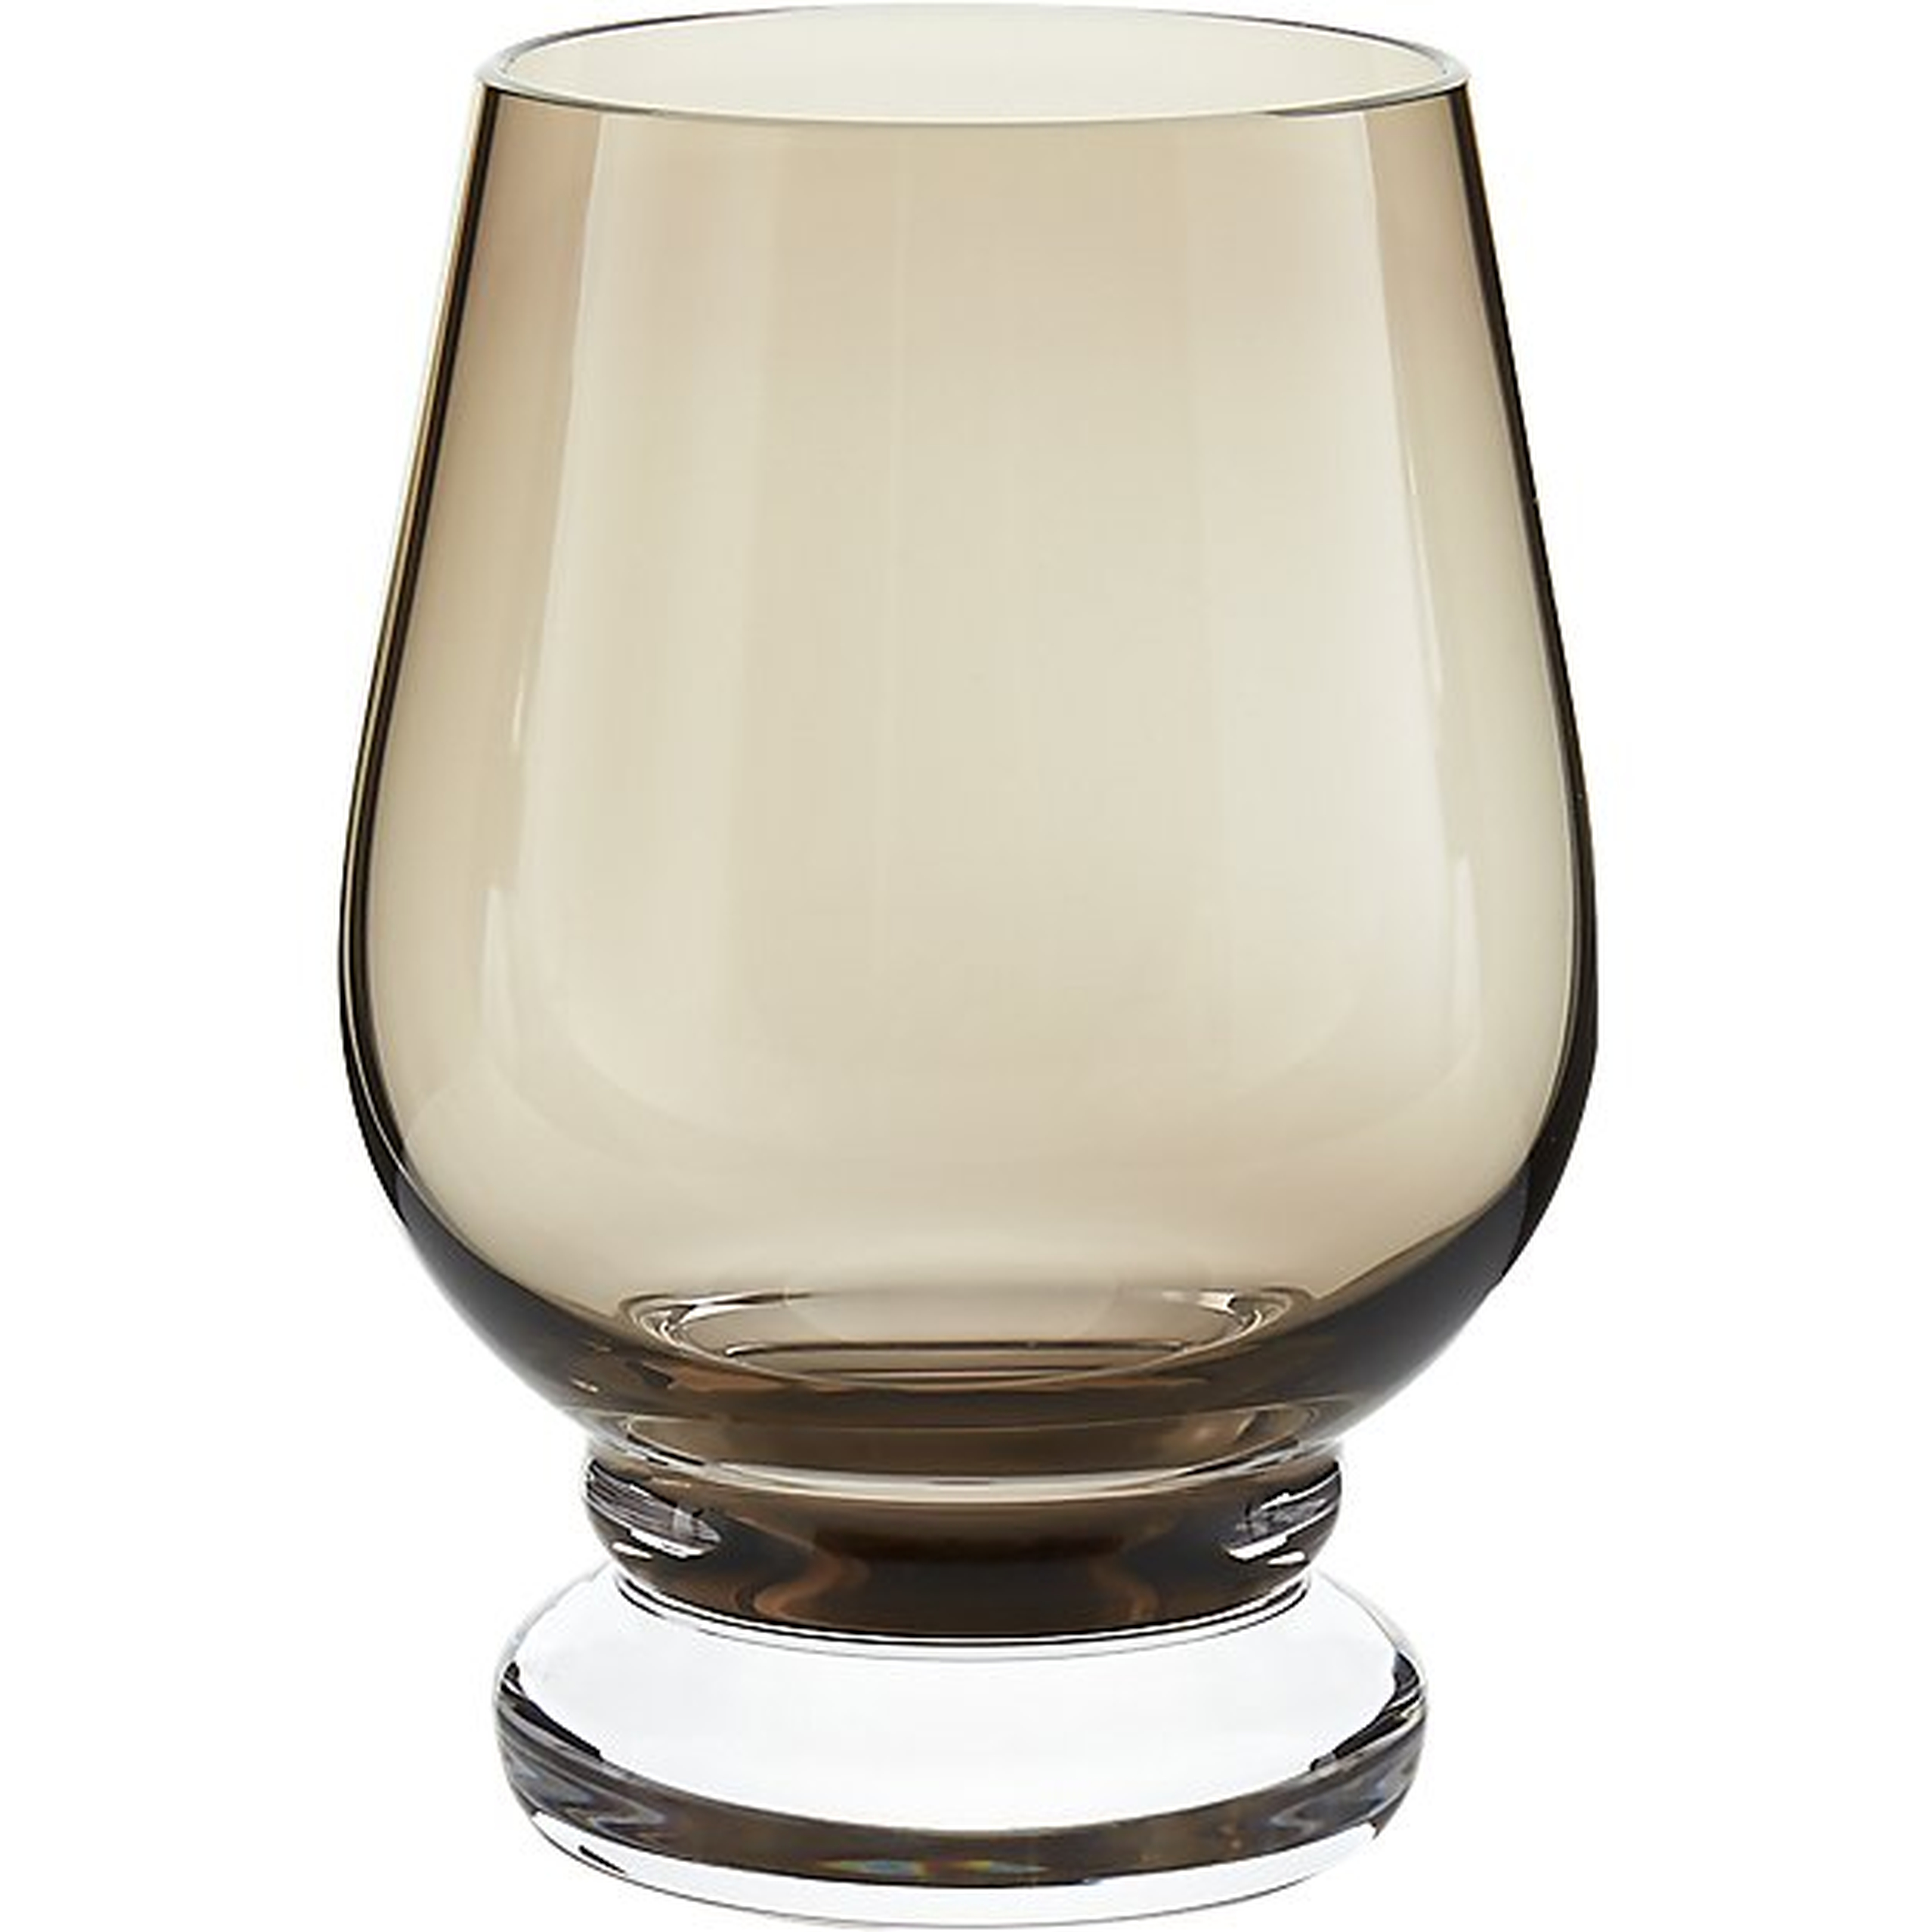 DAUPHINE VINTAGE SMOKE DOUBLE OLD-FASHIONED GLASS - CB2